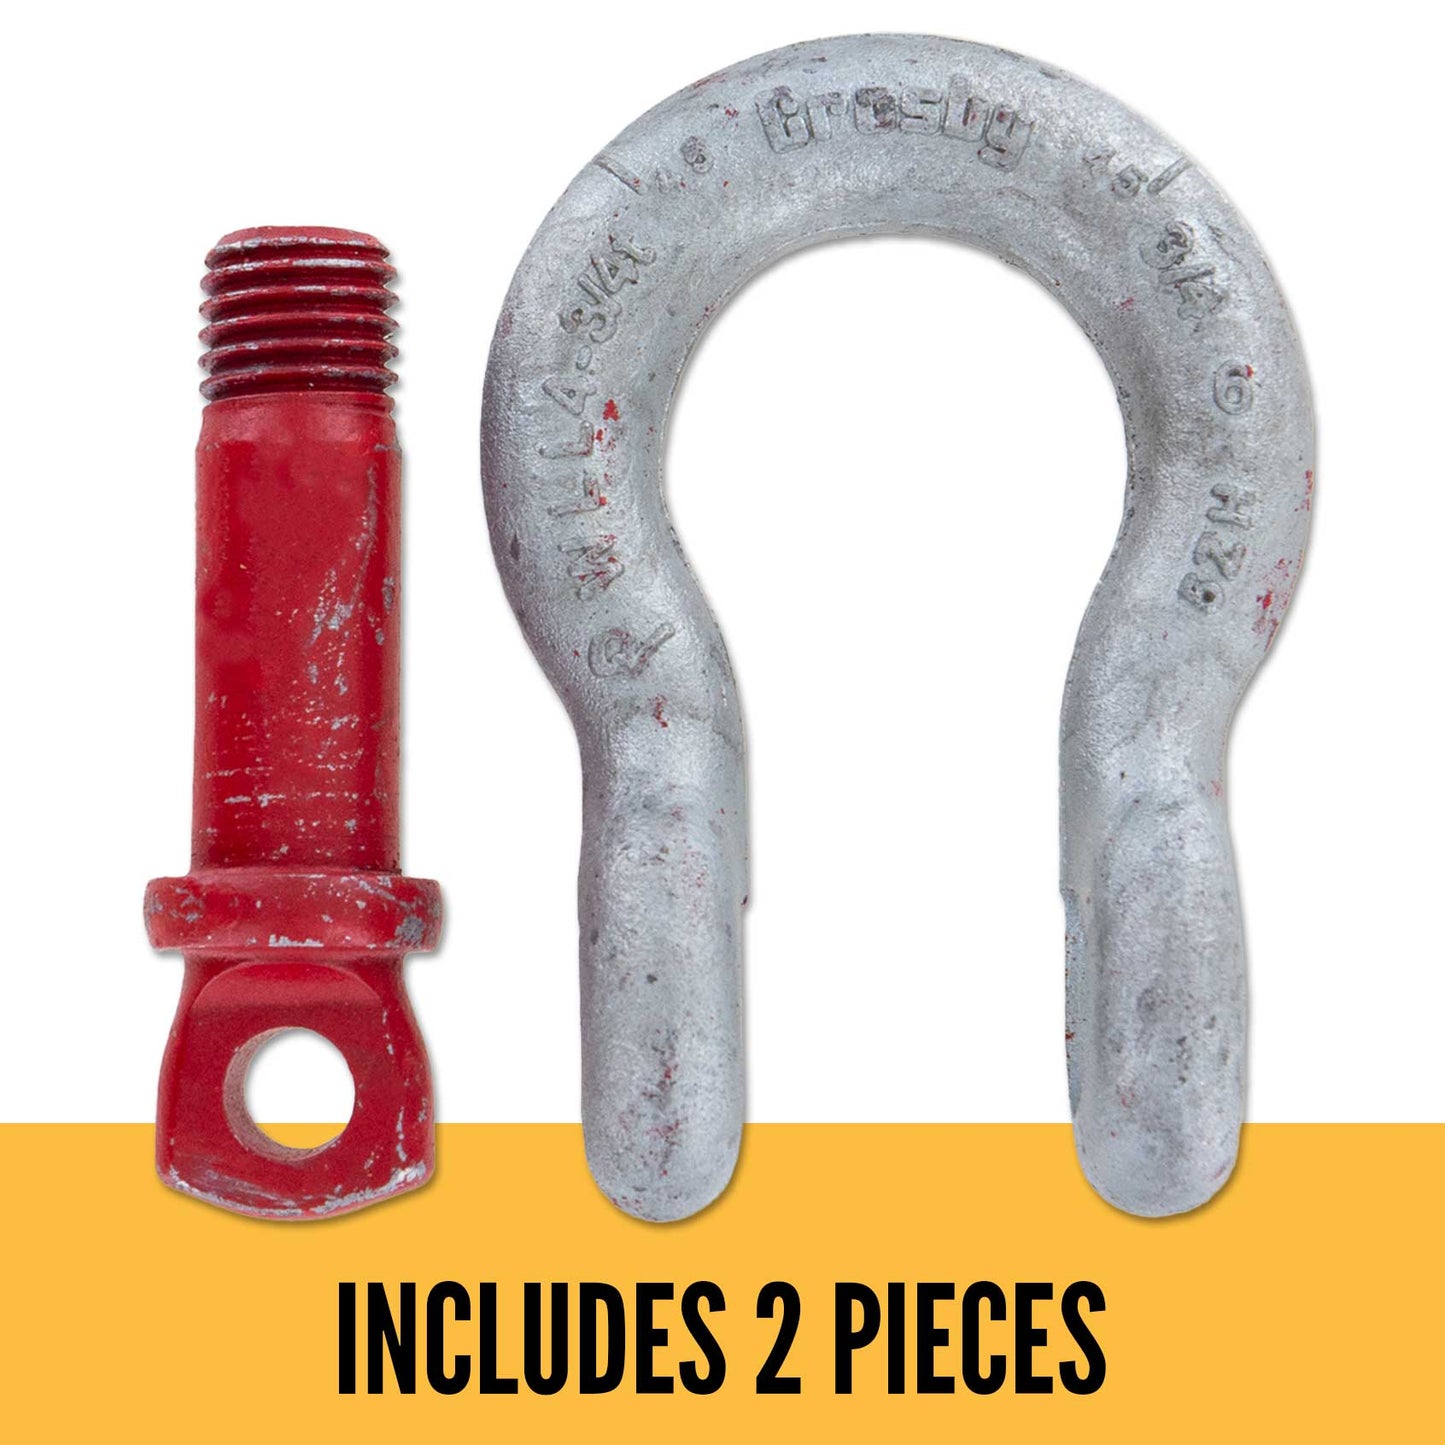 3/8" Crosby® Screw Pin Anchor Shackle | G-209 - 1 Ton parts of a shackle